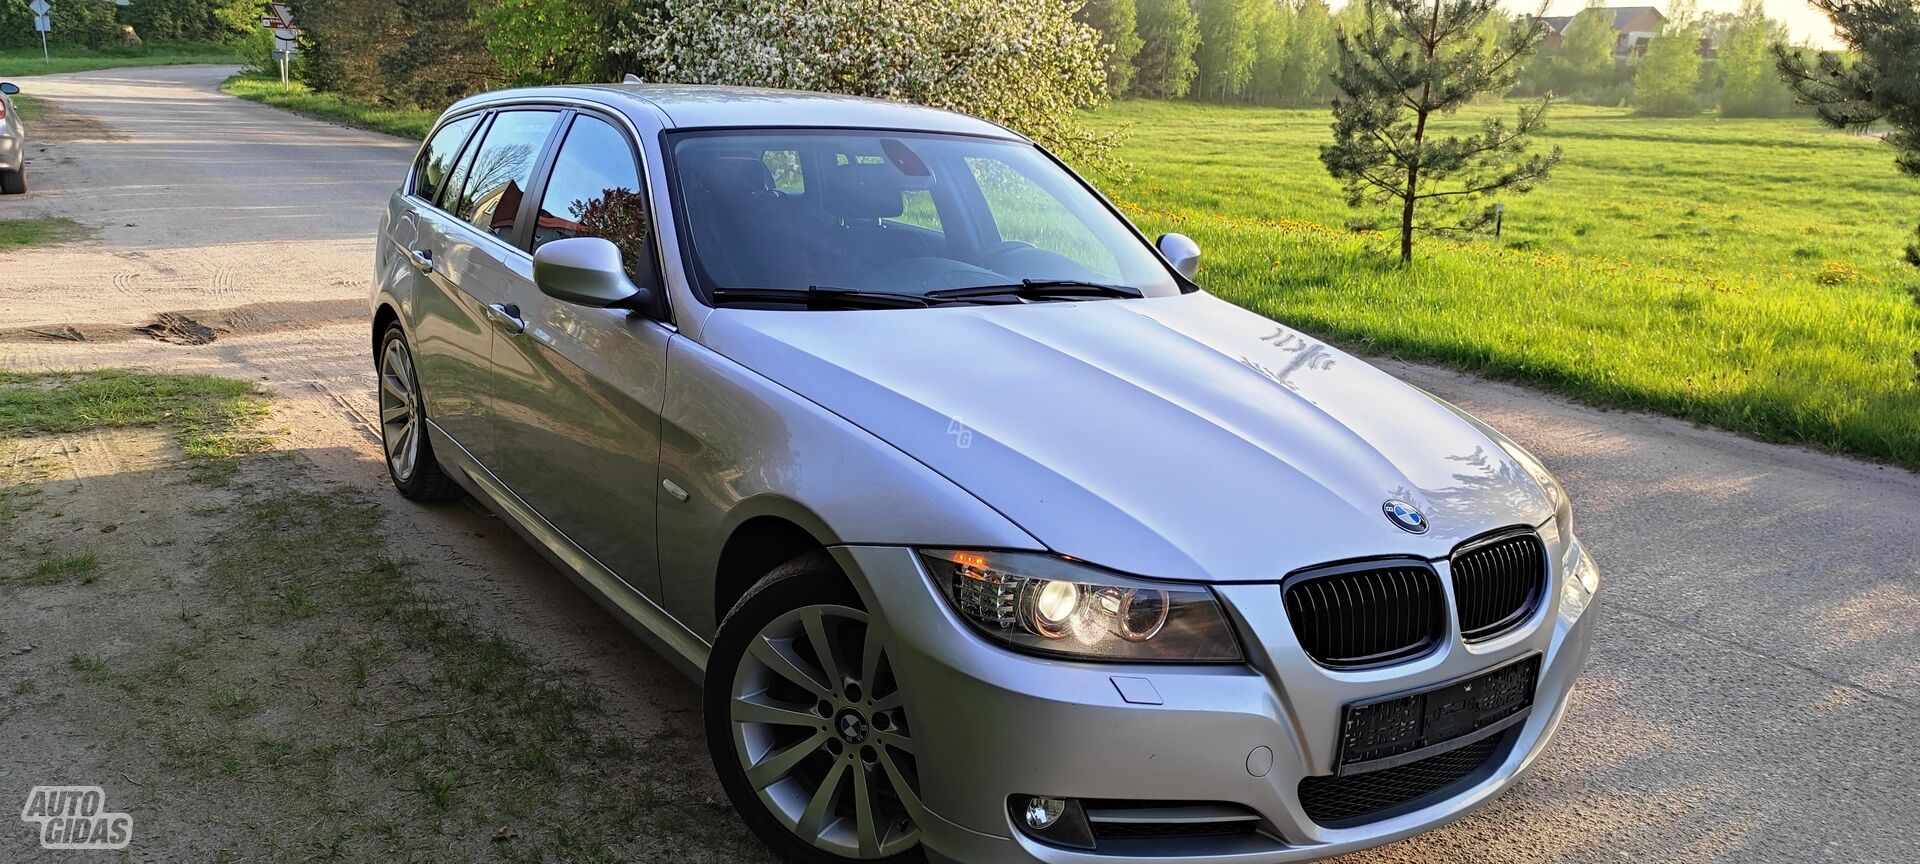 Bmw 320 d Touring 2010 y